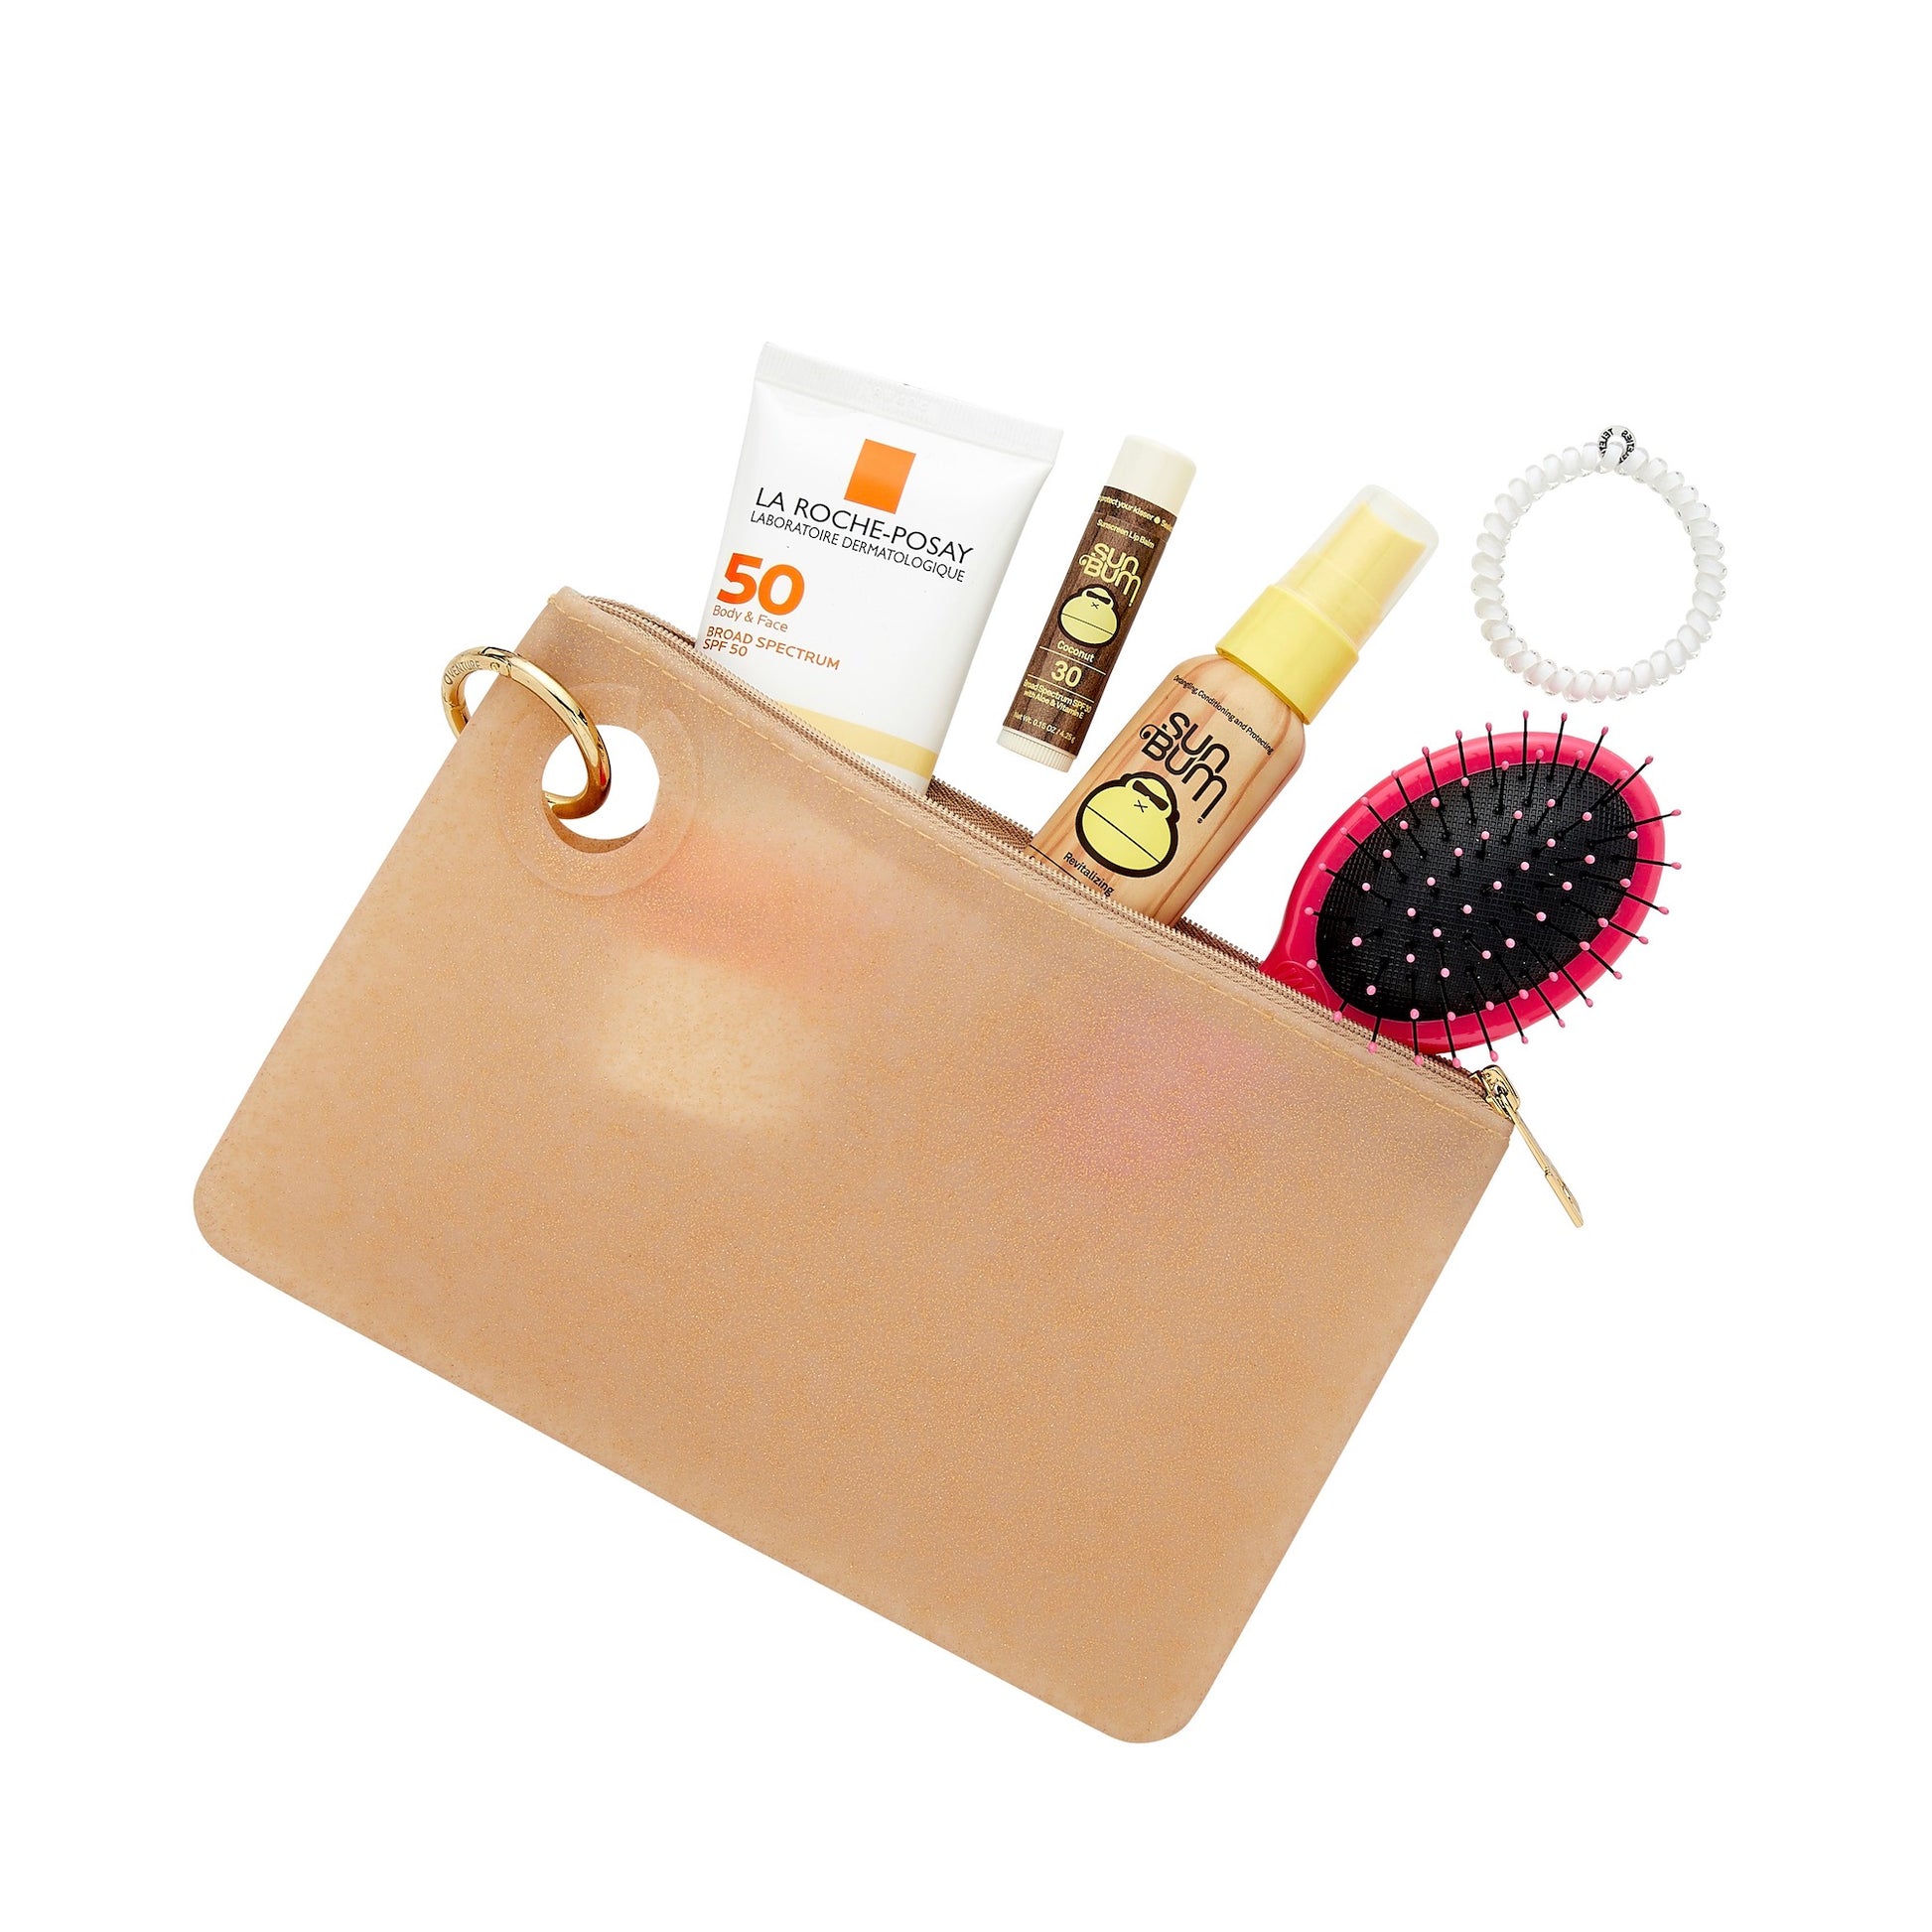 Large gold confetti silicone pouch filled with essentials like hair brush, sunscreen and chapstick by Oventure